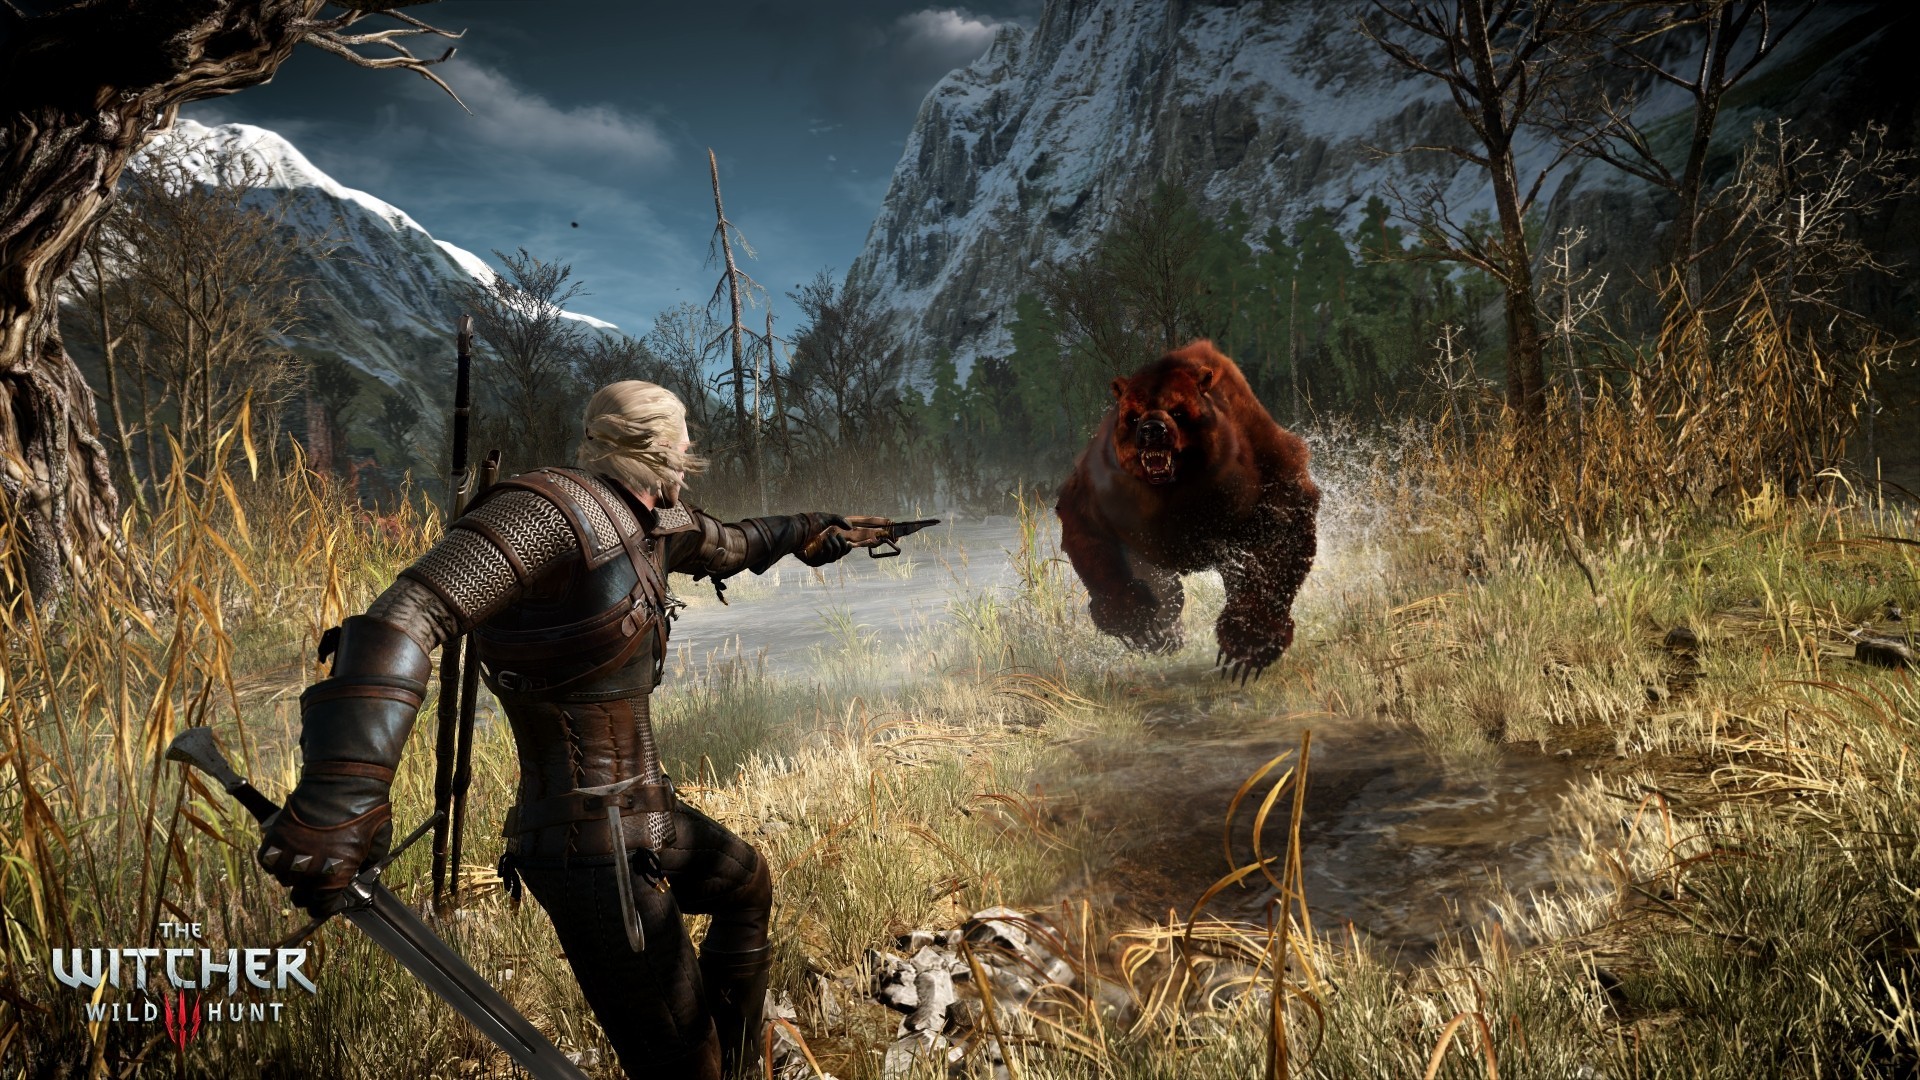 no-hd-remakes-for-the-witcher-1-and-2-on-ps4-or-xbox-one-cd-projekt